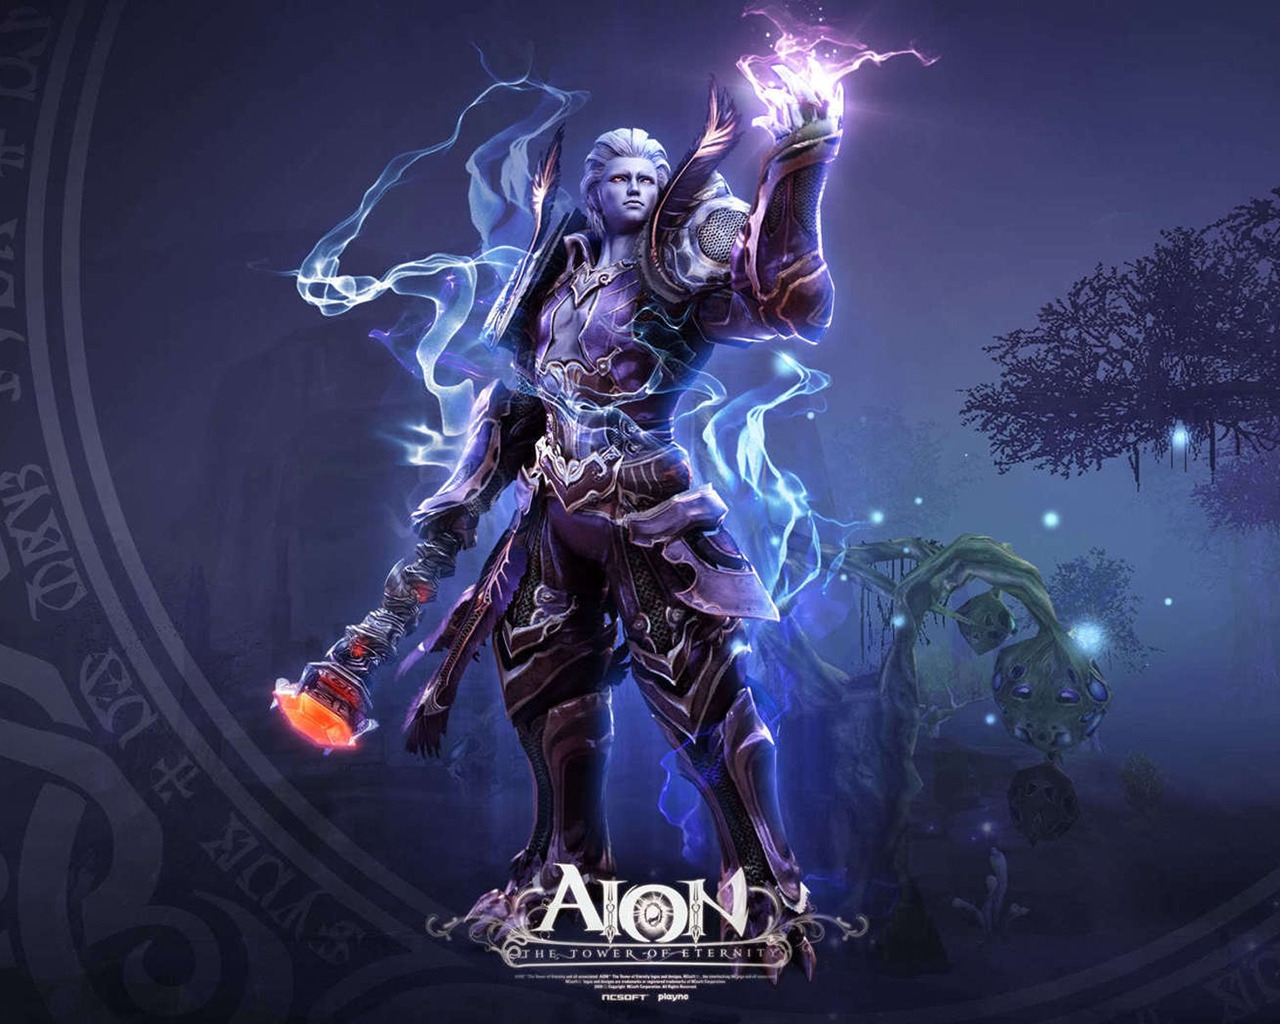 Aion The Tower of Eternity Game for 1280 x 1024 resolution